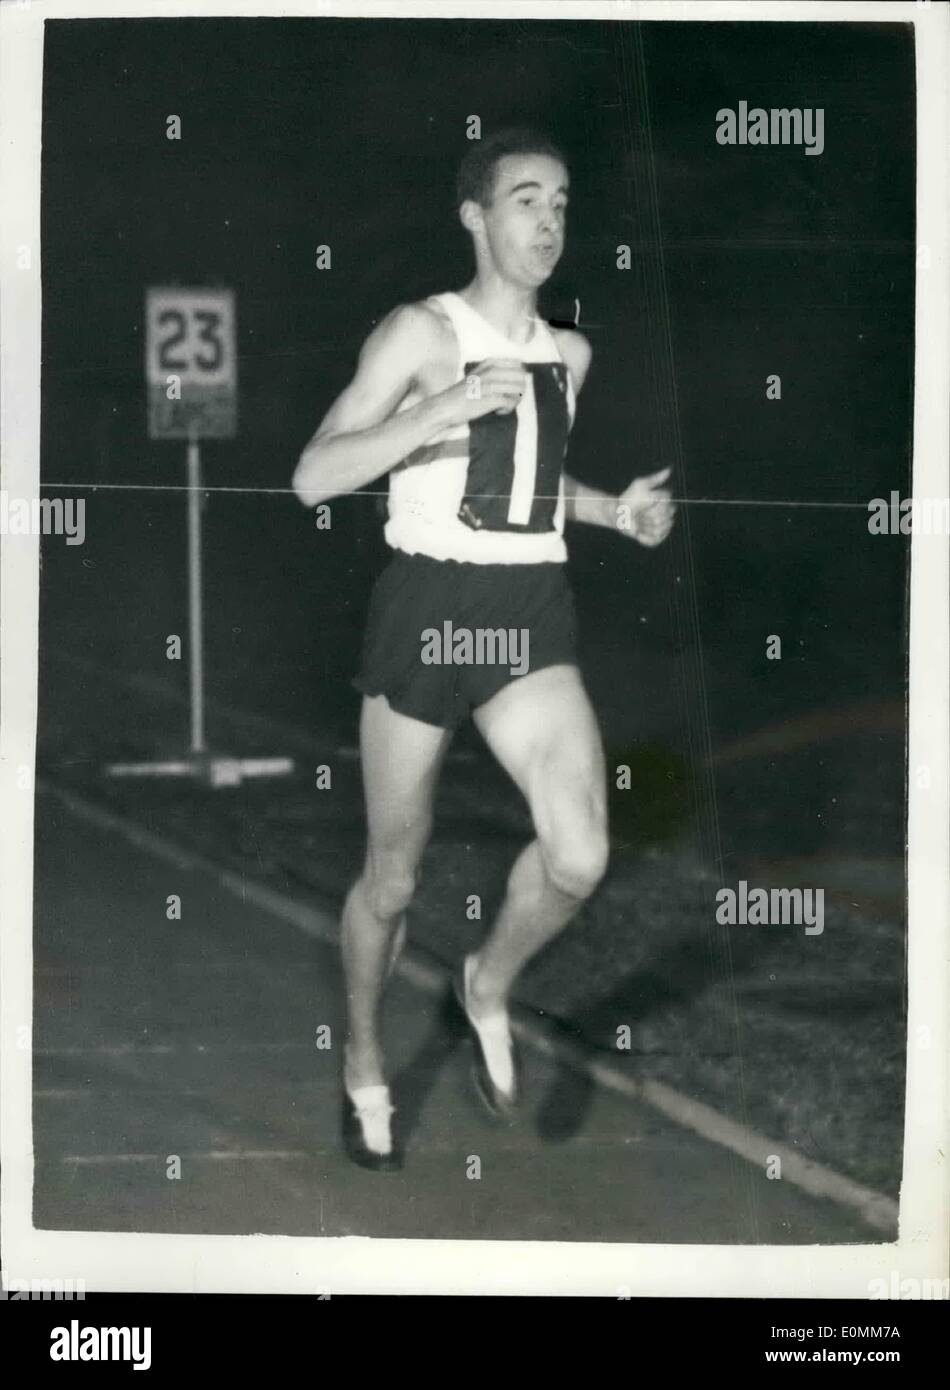 Oct. 12, 1955 - 12-10-55 London. Prague athletic meeting at White City. Gordon Pirie beats Emil Zatopek in 10,000 metres.. Gordon Pirie won the 10,000 metres even in the London. Prague athletic meeting at White City this evening by beating fell countryman Ken Norkis with Emil Zatopek, world record holder in this place. Keystone Photo Shows: Pirie finishes the 10,000 metres event, an easy winner at White City this evening. Stock Photo